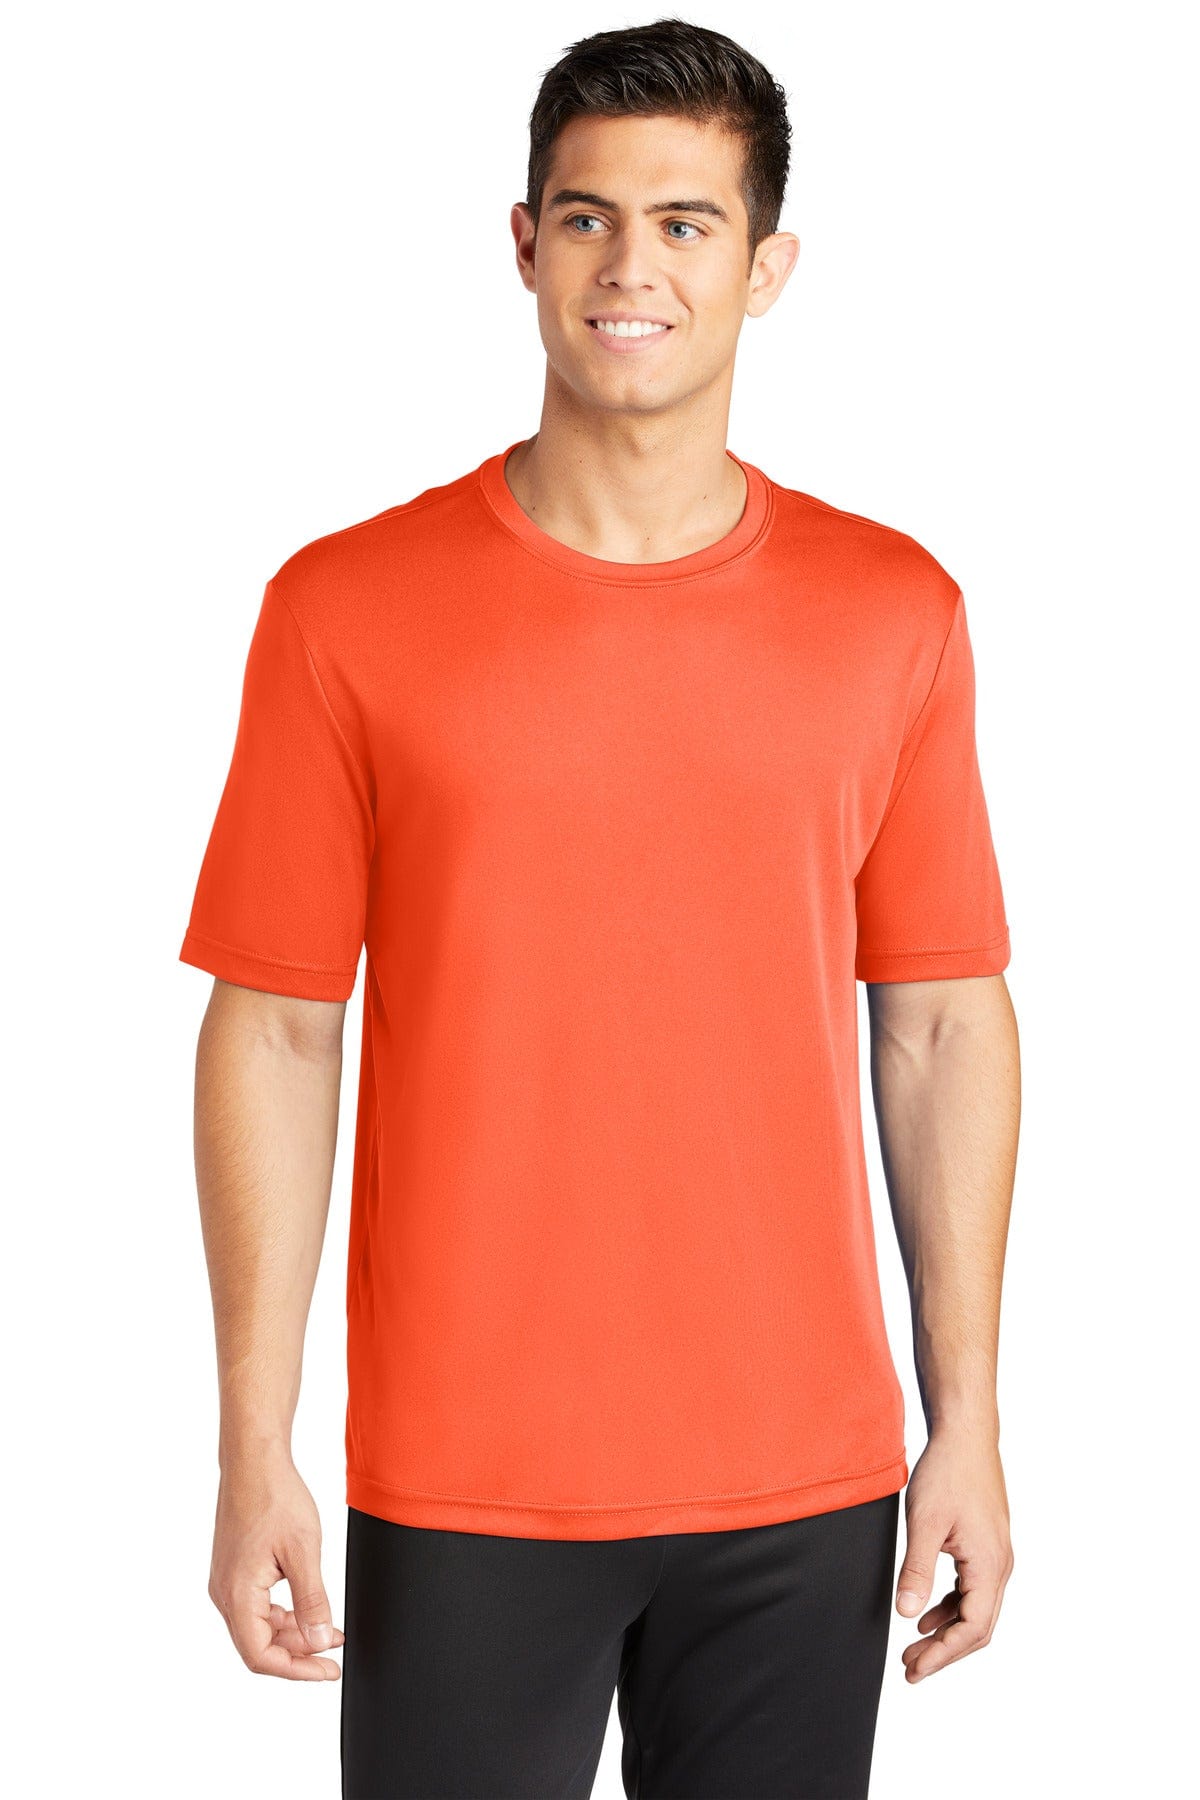 Sport-Tek PosiCharge Competitor Tee. ST350, Traditional Colors